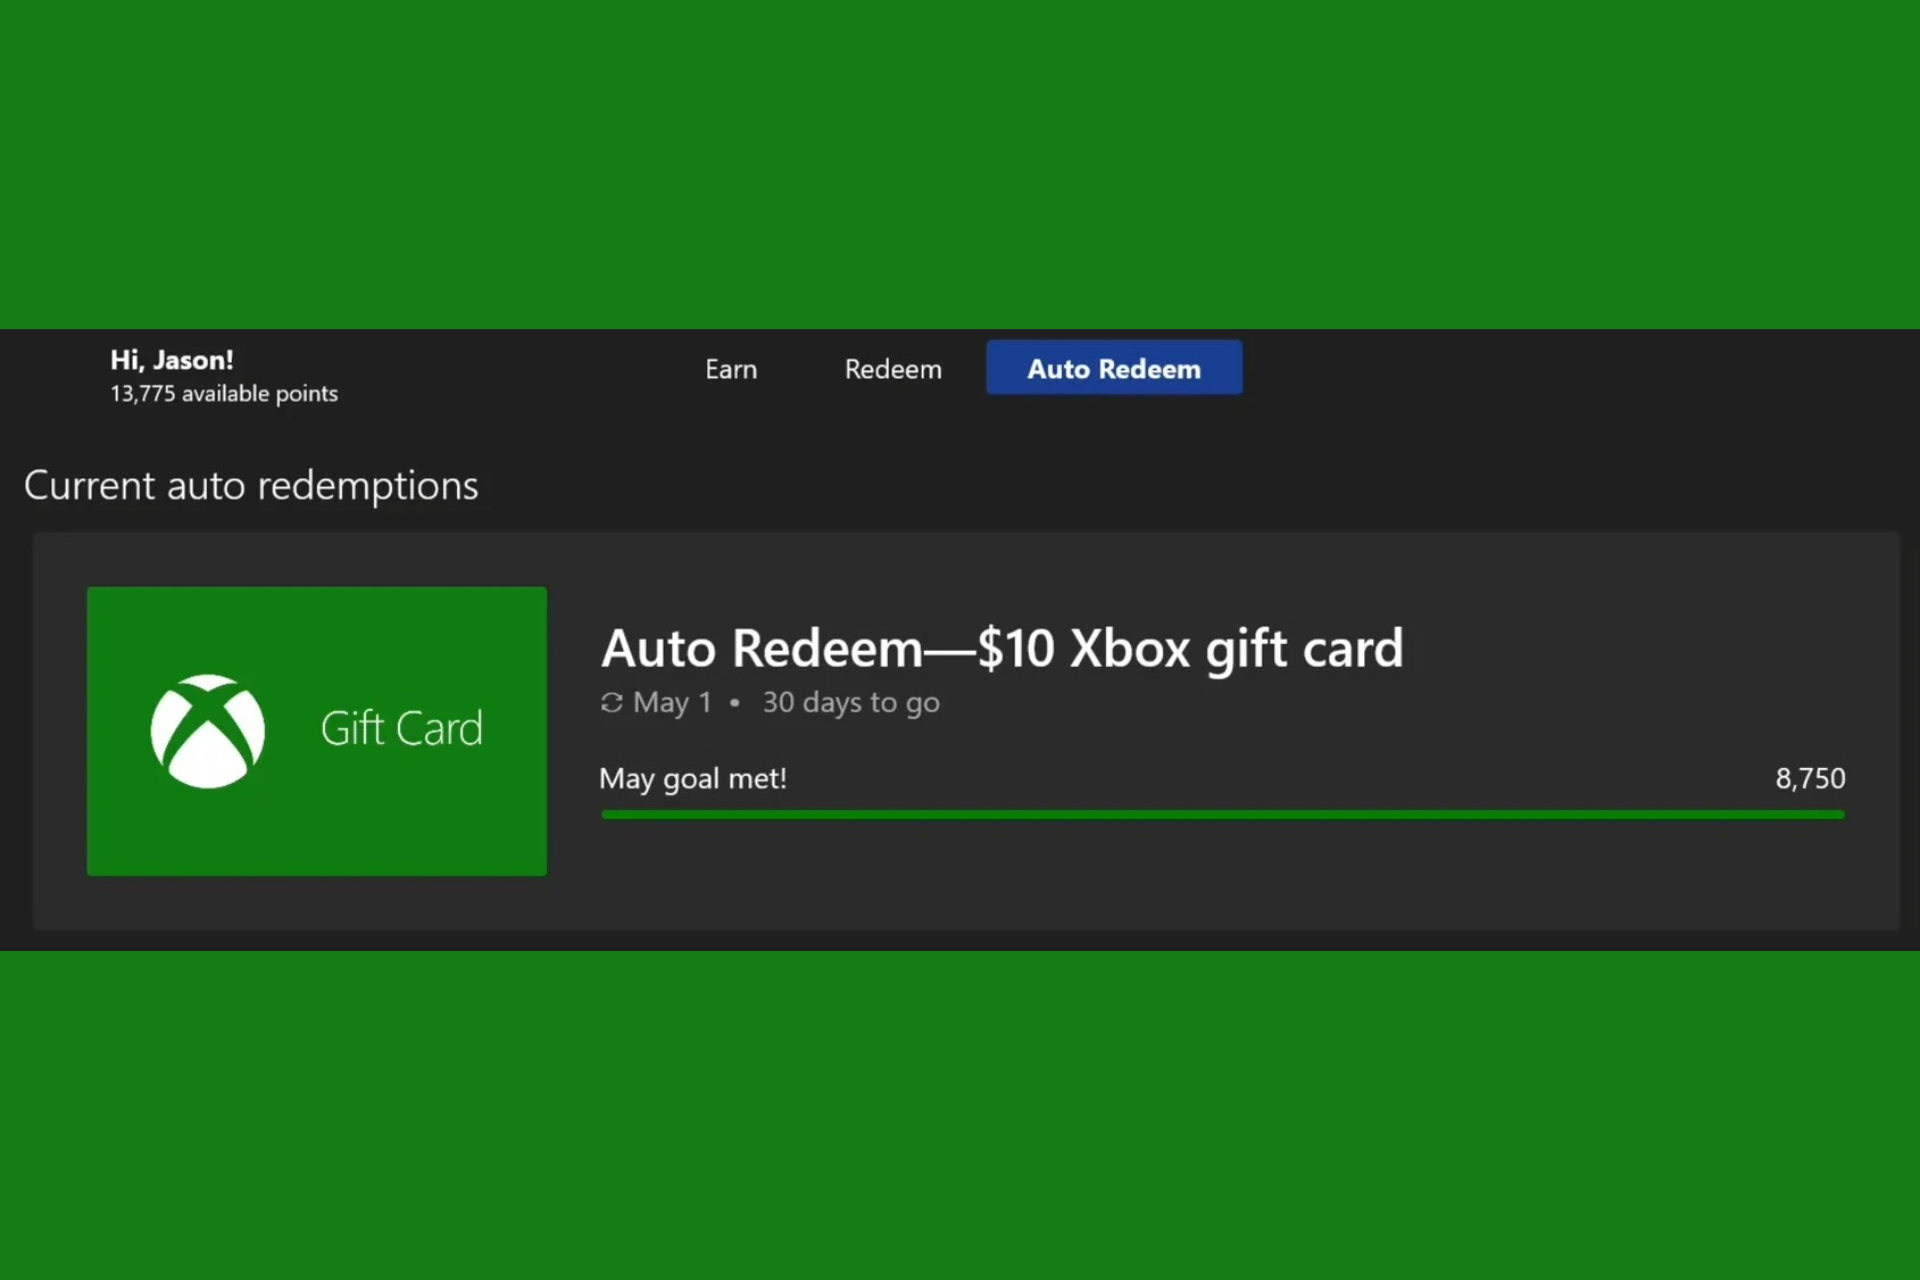 How to get the Xbox Auto Redeem gift card